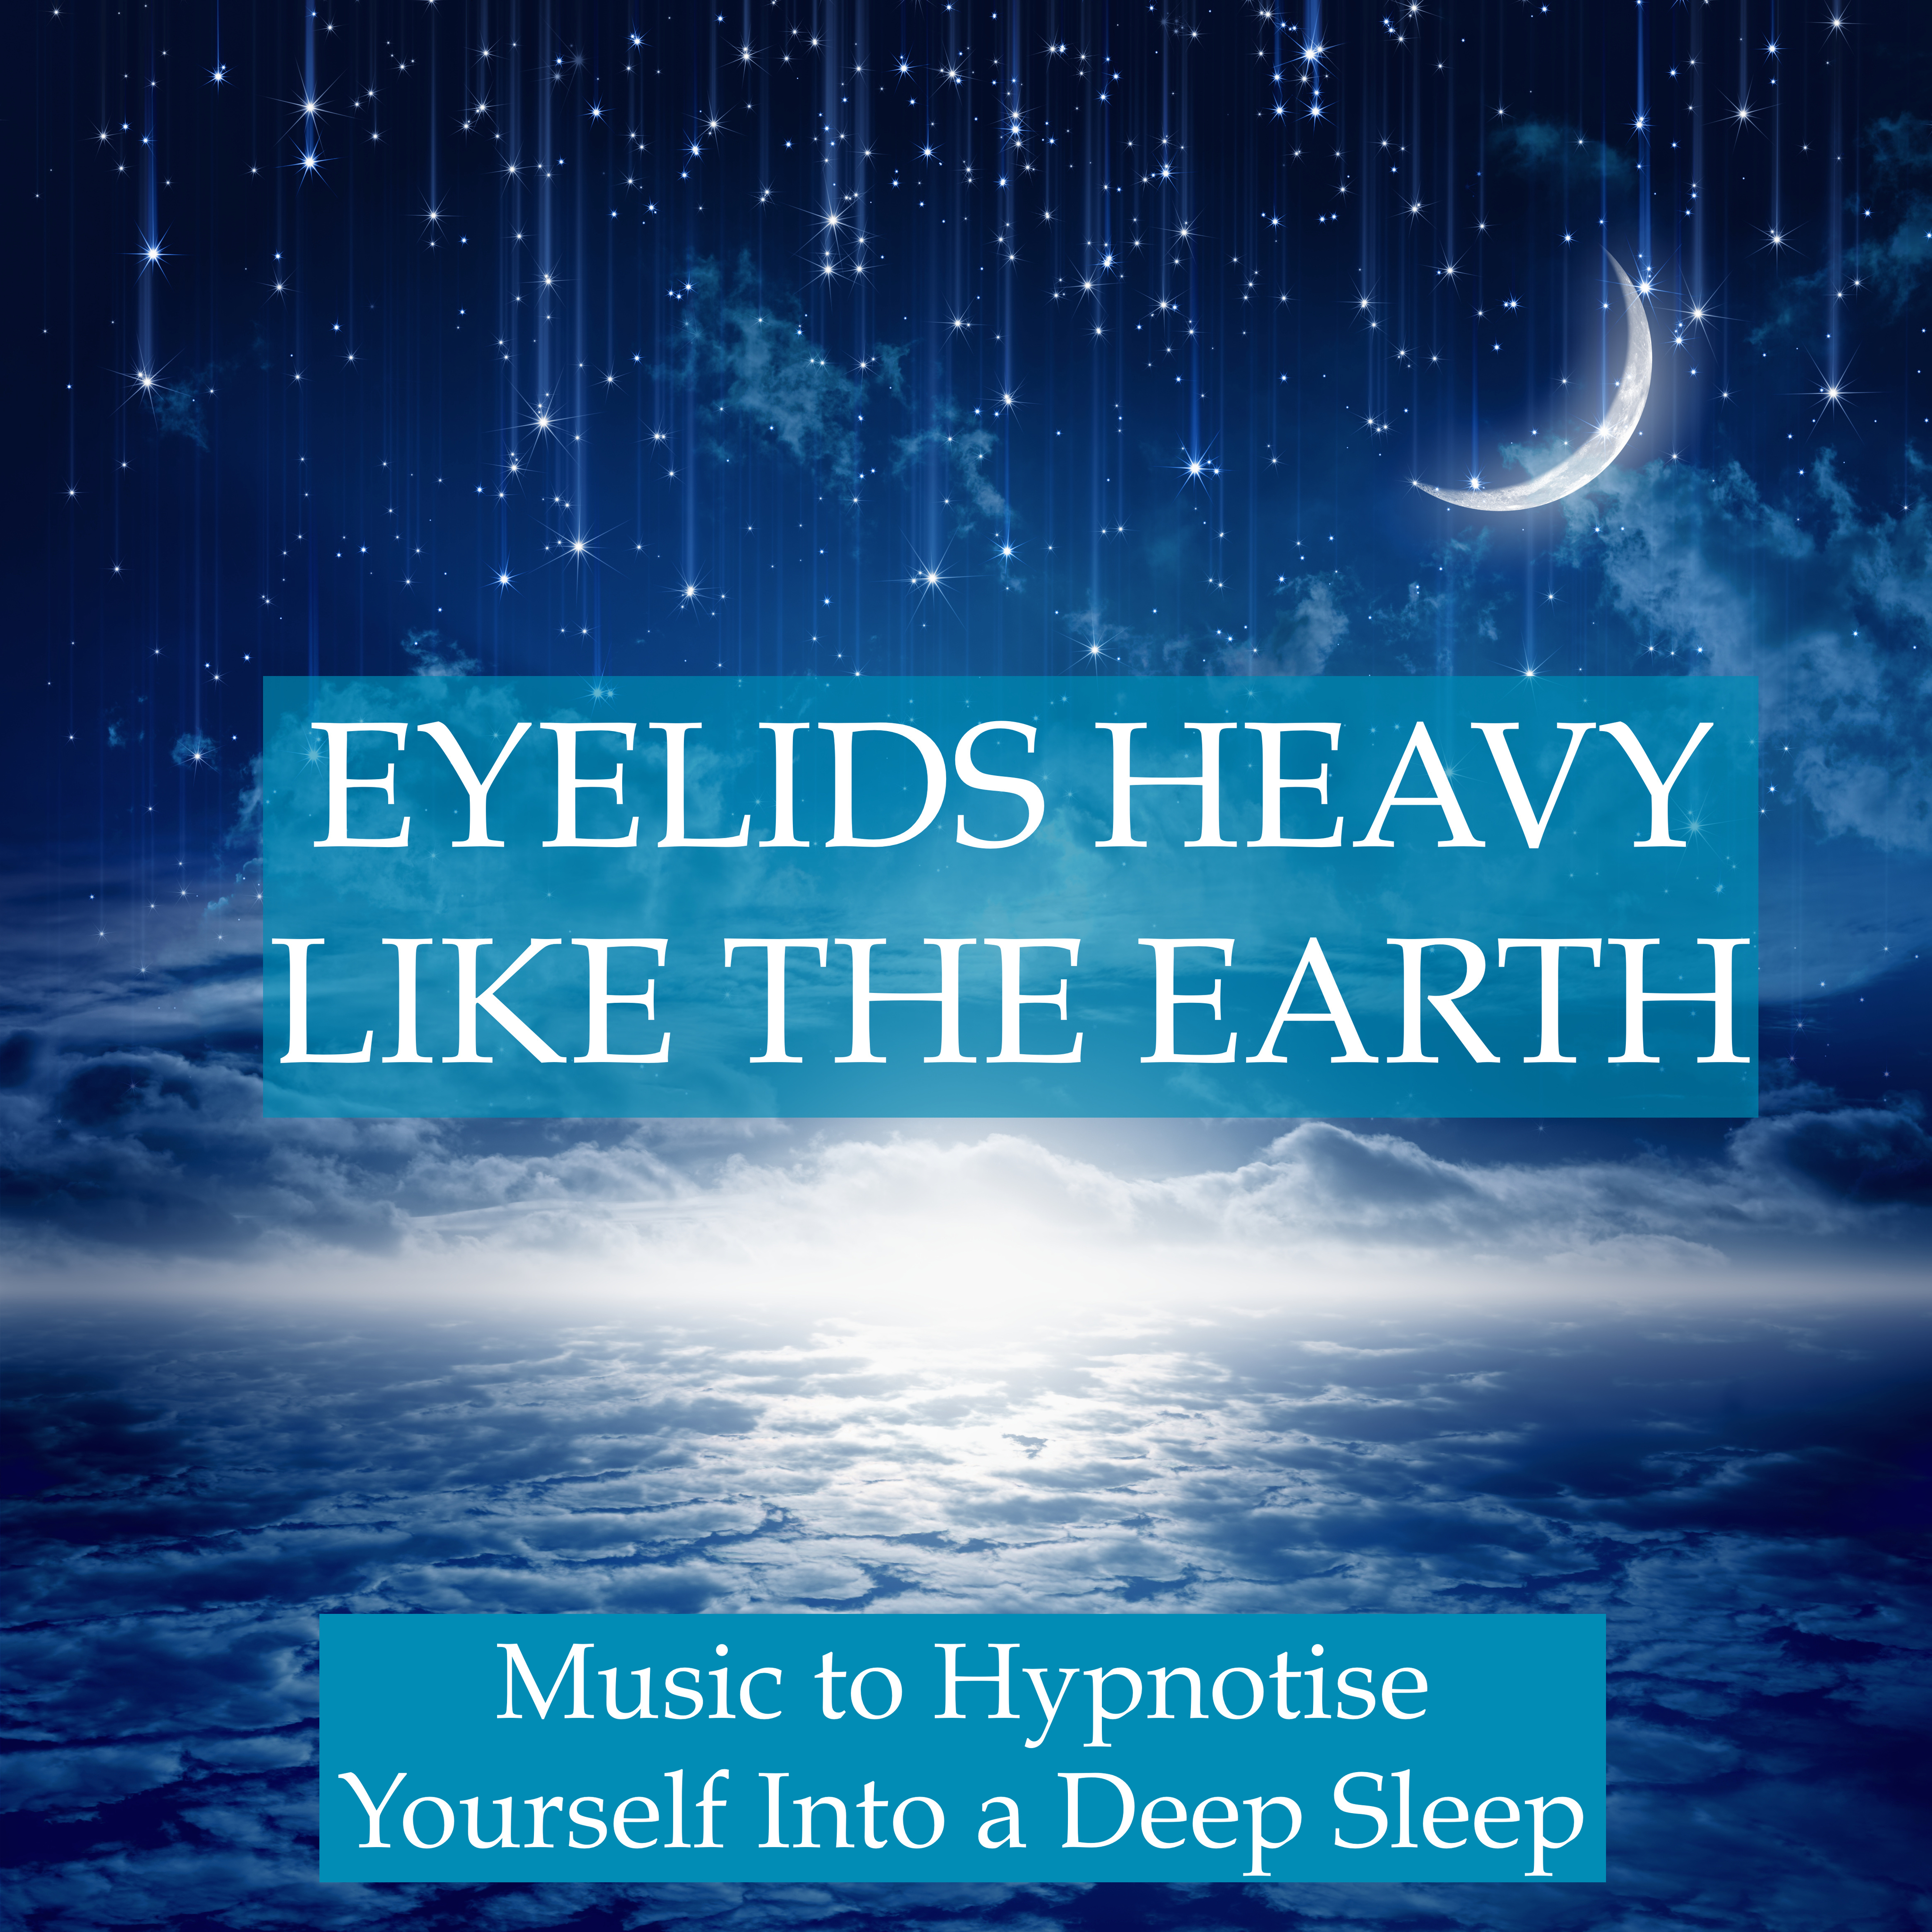 Eyelids Heavy Like the Earth - Music to Hypnotise Yourself into a Deep Sleep State, Relax, Unwind, Meditate and Start to Lucid Dream